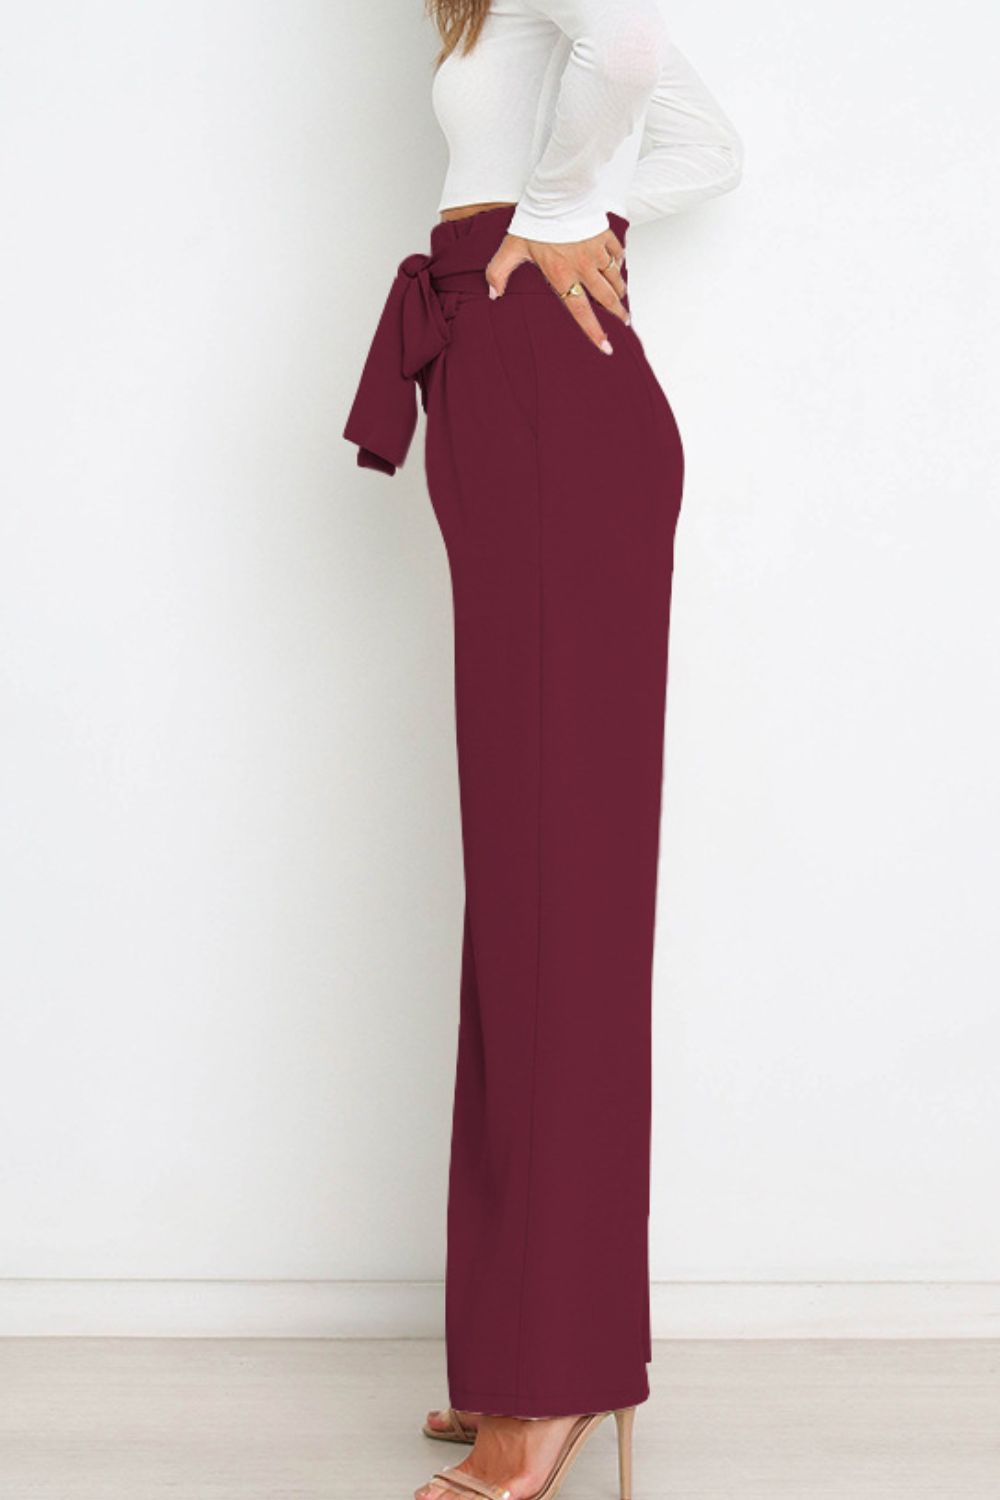 Tamia Tie Front Paperbag Wide Leg Pants in an Assortment of Colors